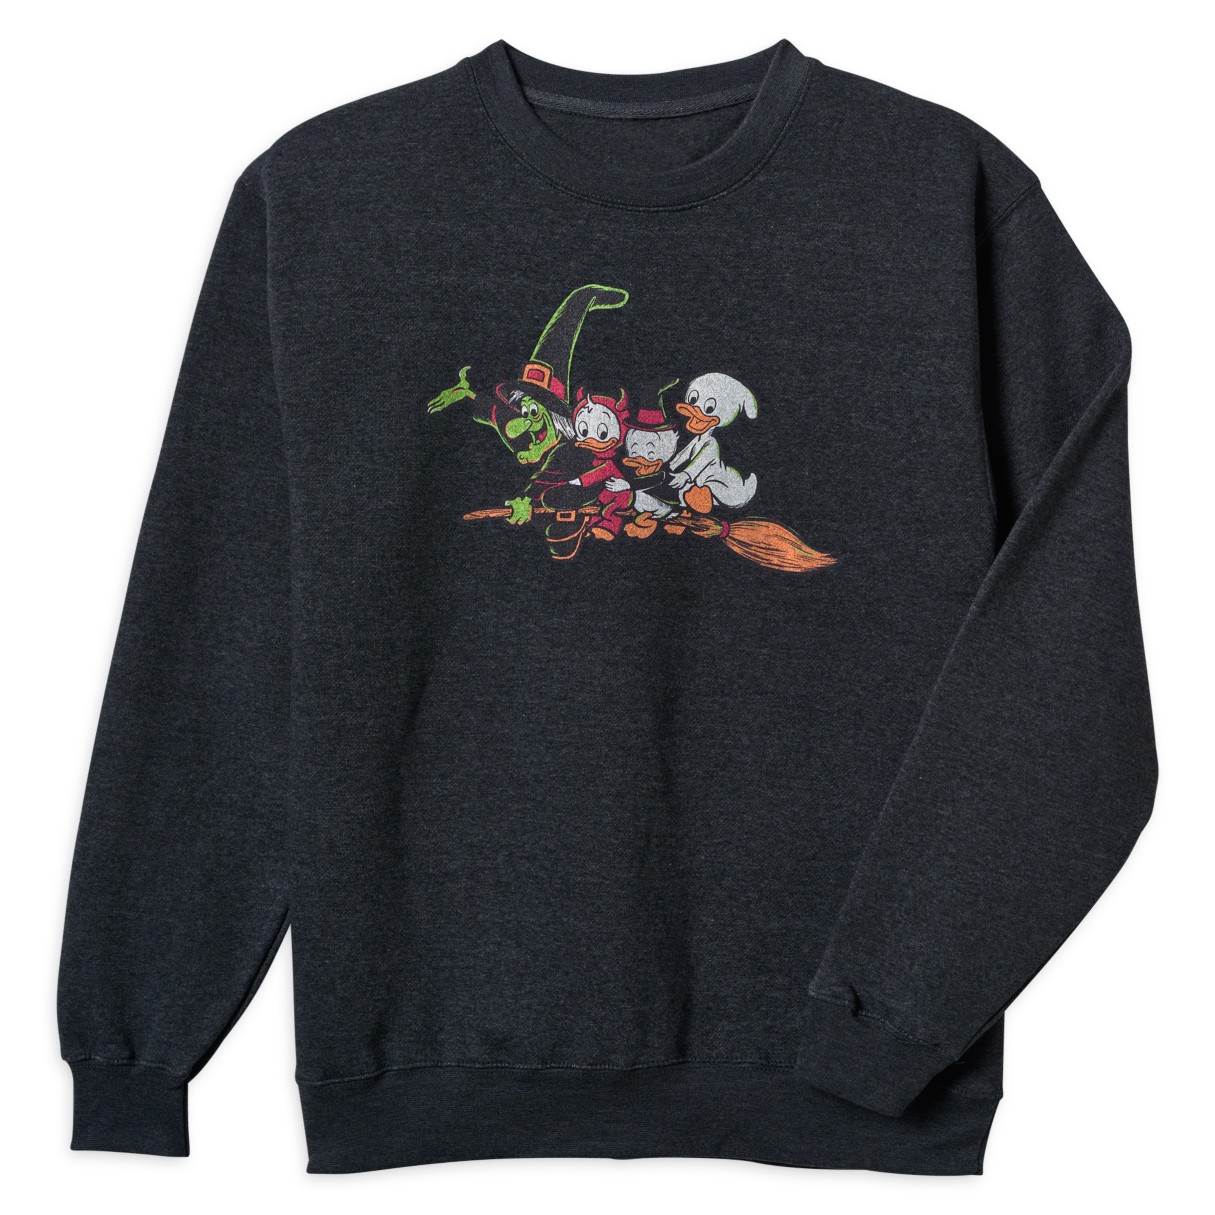 Witch Hazel, Huey, Dewey and Louie Halloween Pullover Sweatshirt for Adults – Trick or Treat